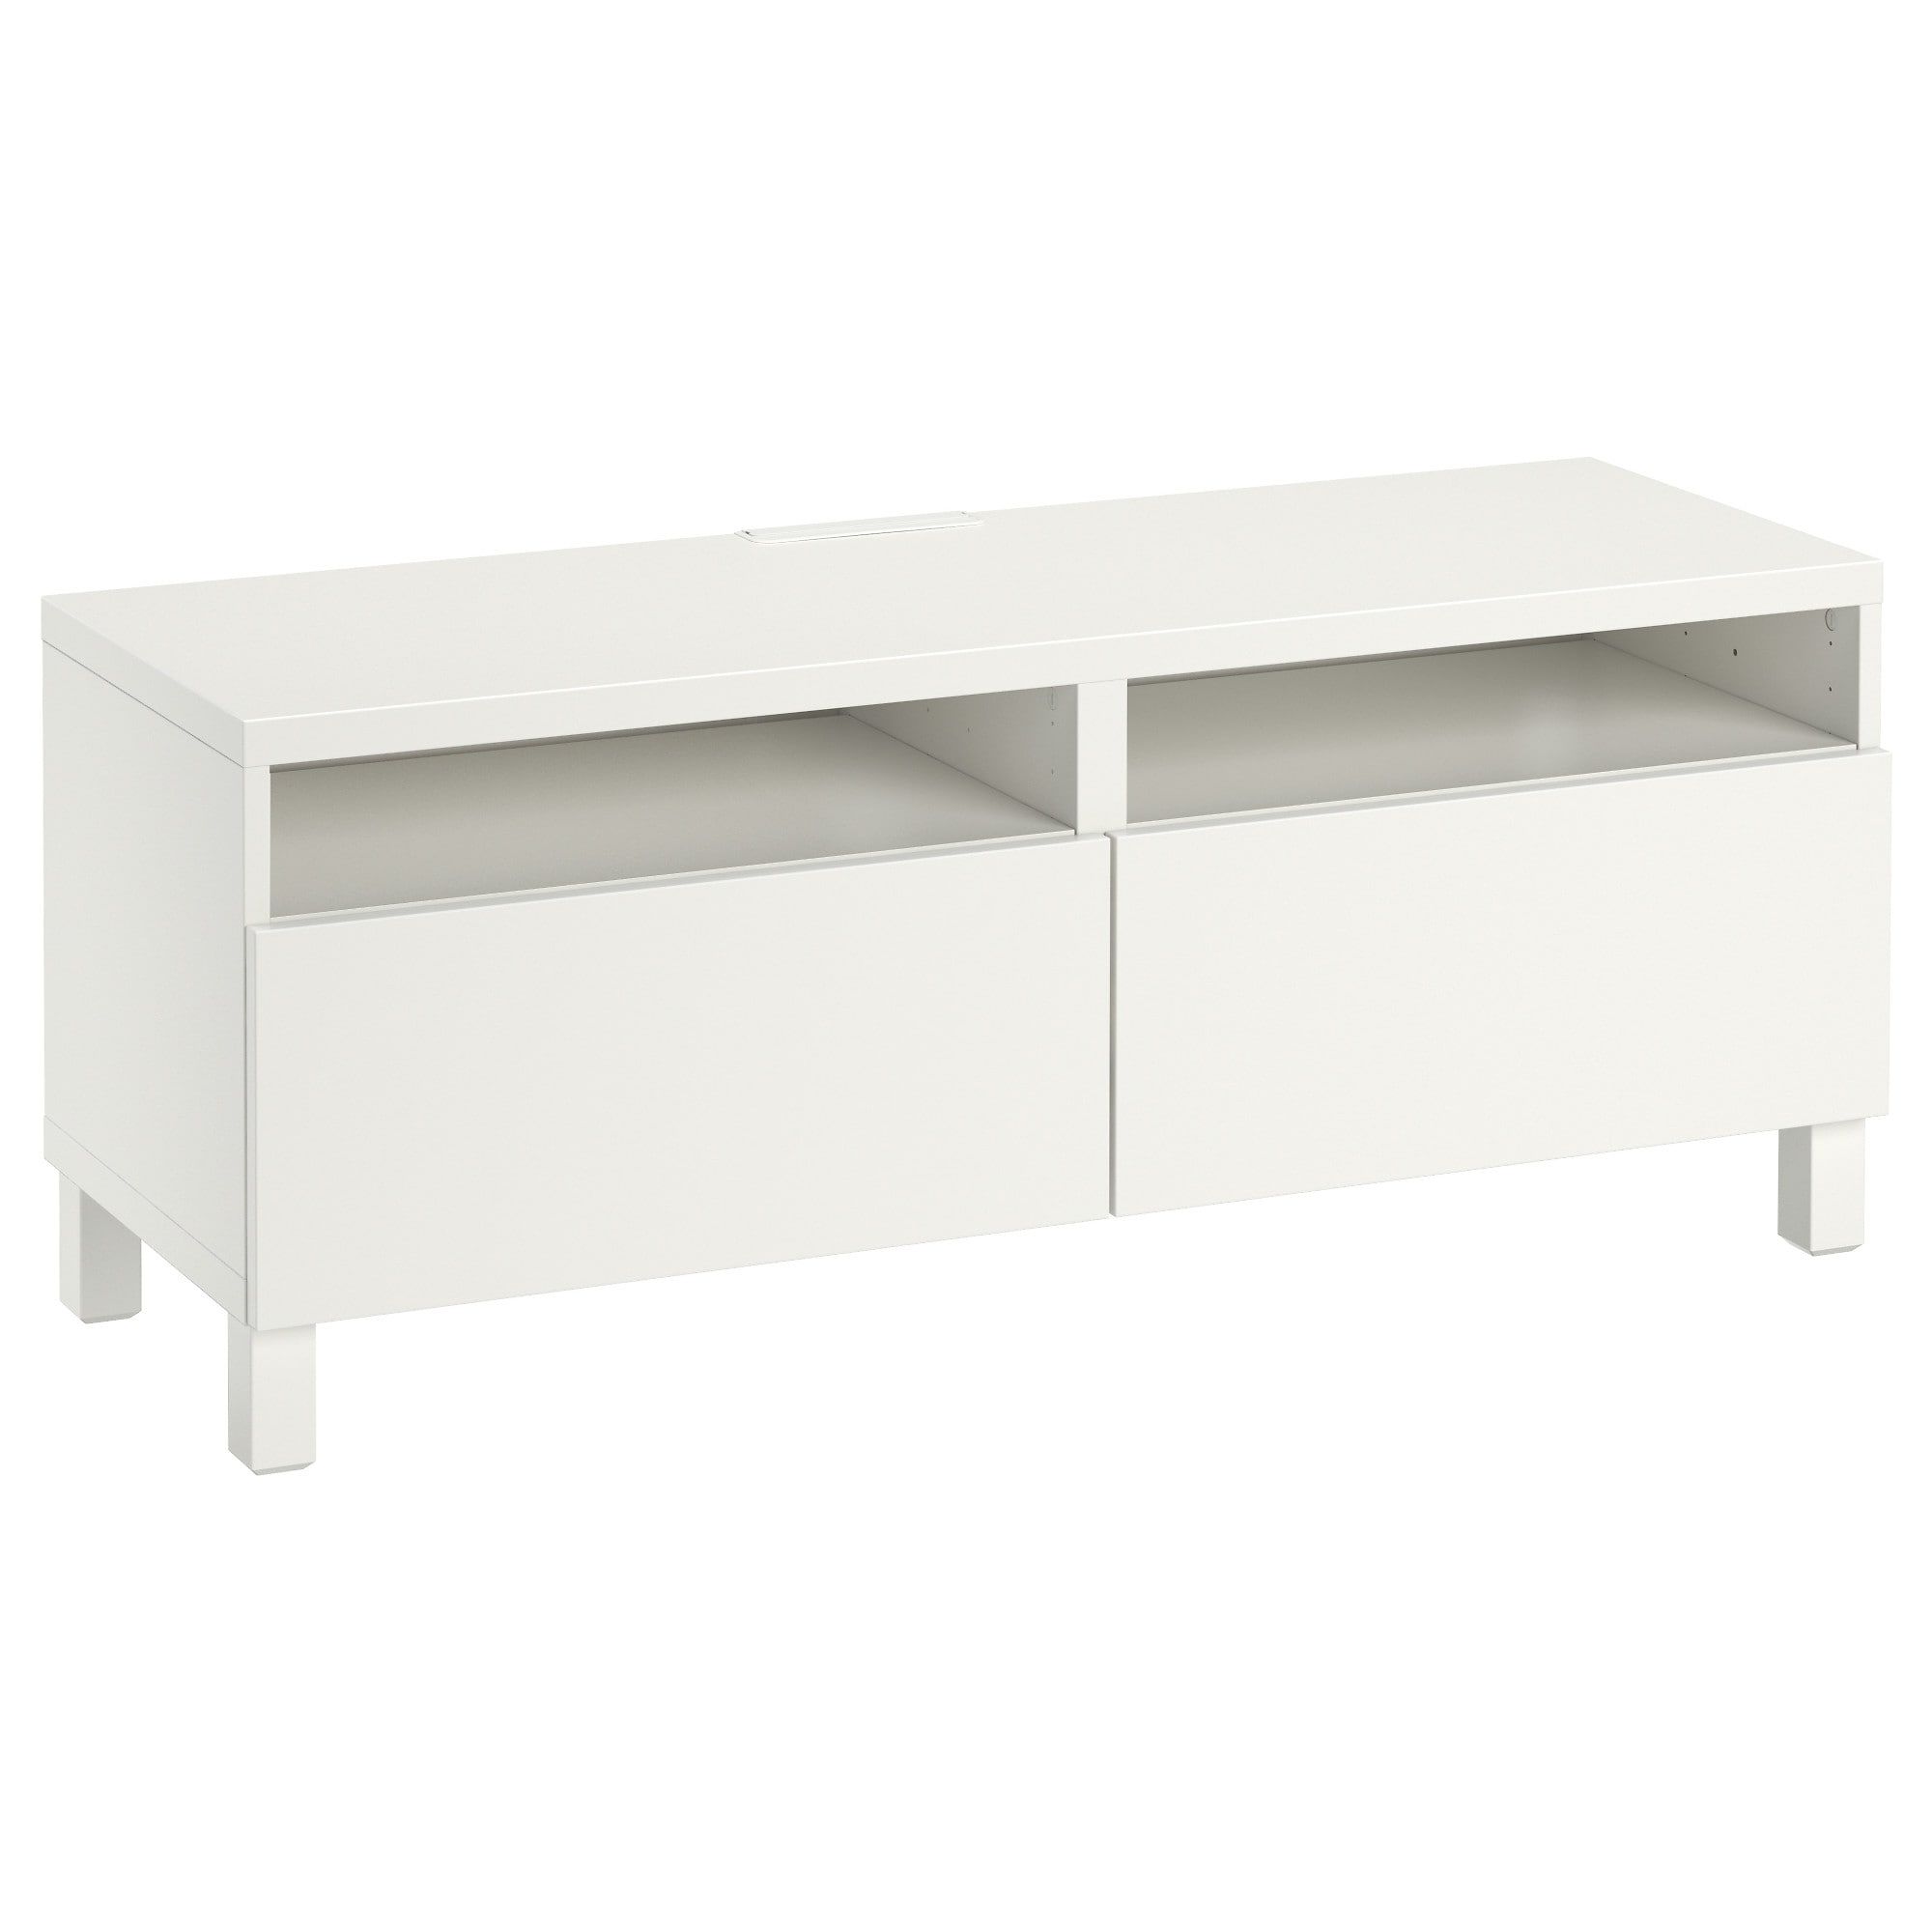 Ikea Pertaining To Recent White Tv Cabinets (View 20 of 20)